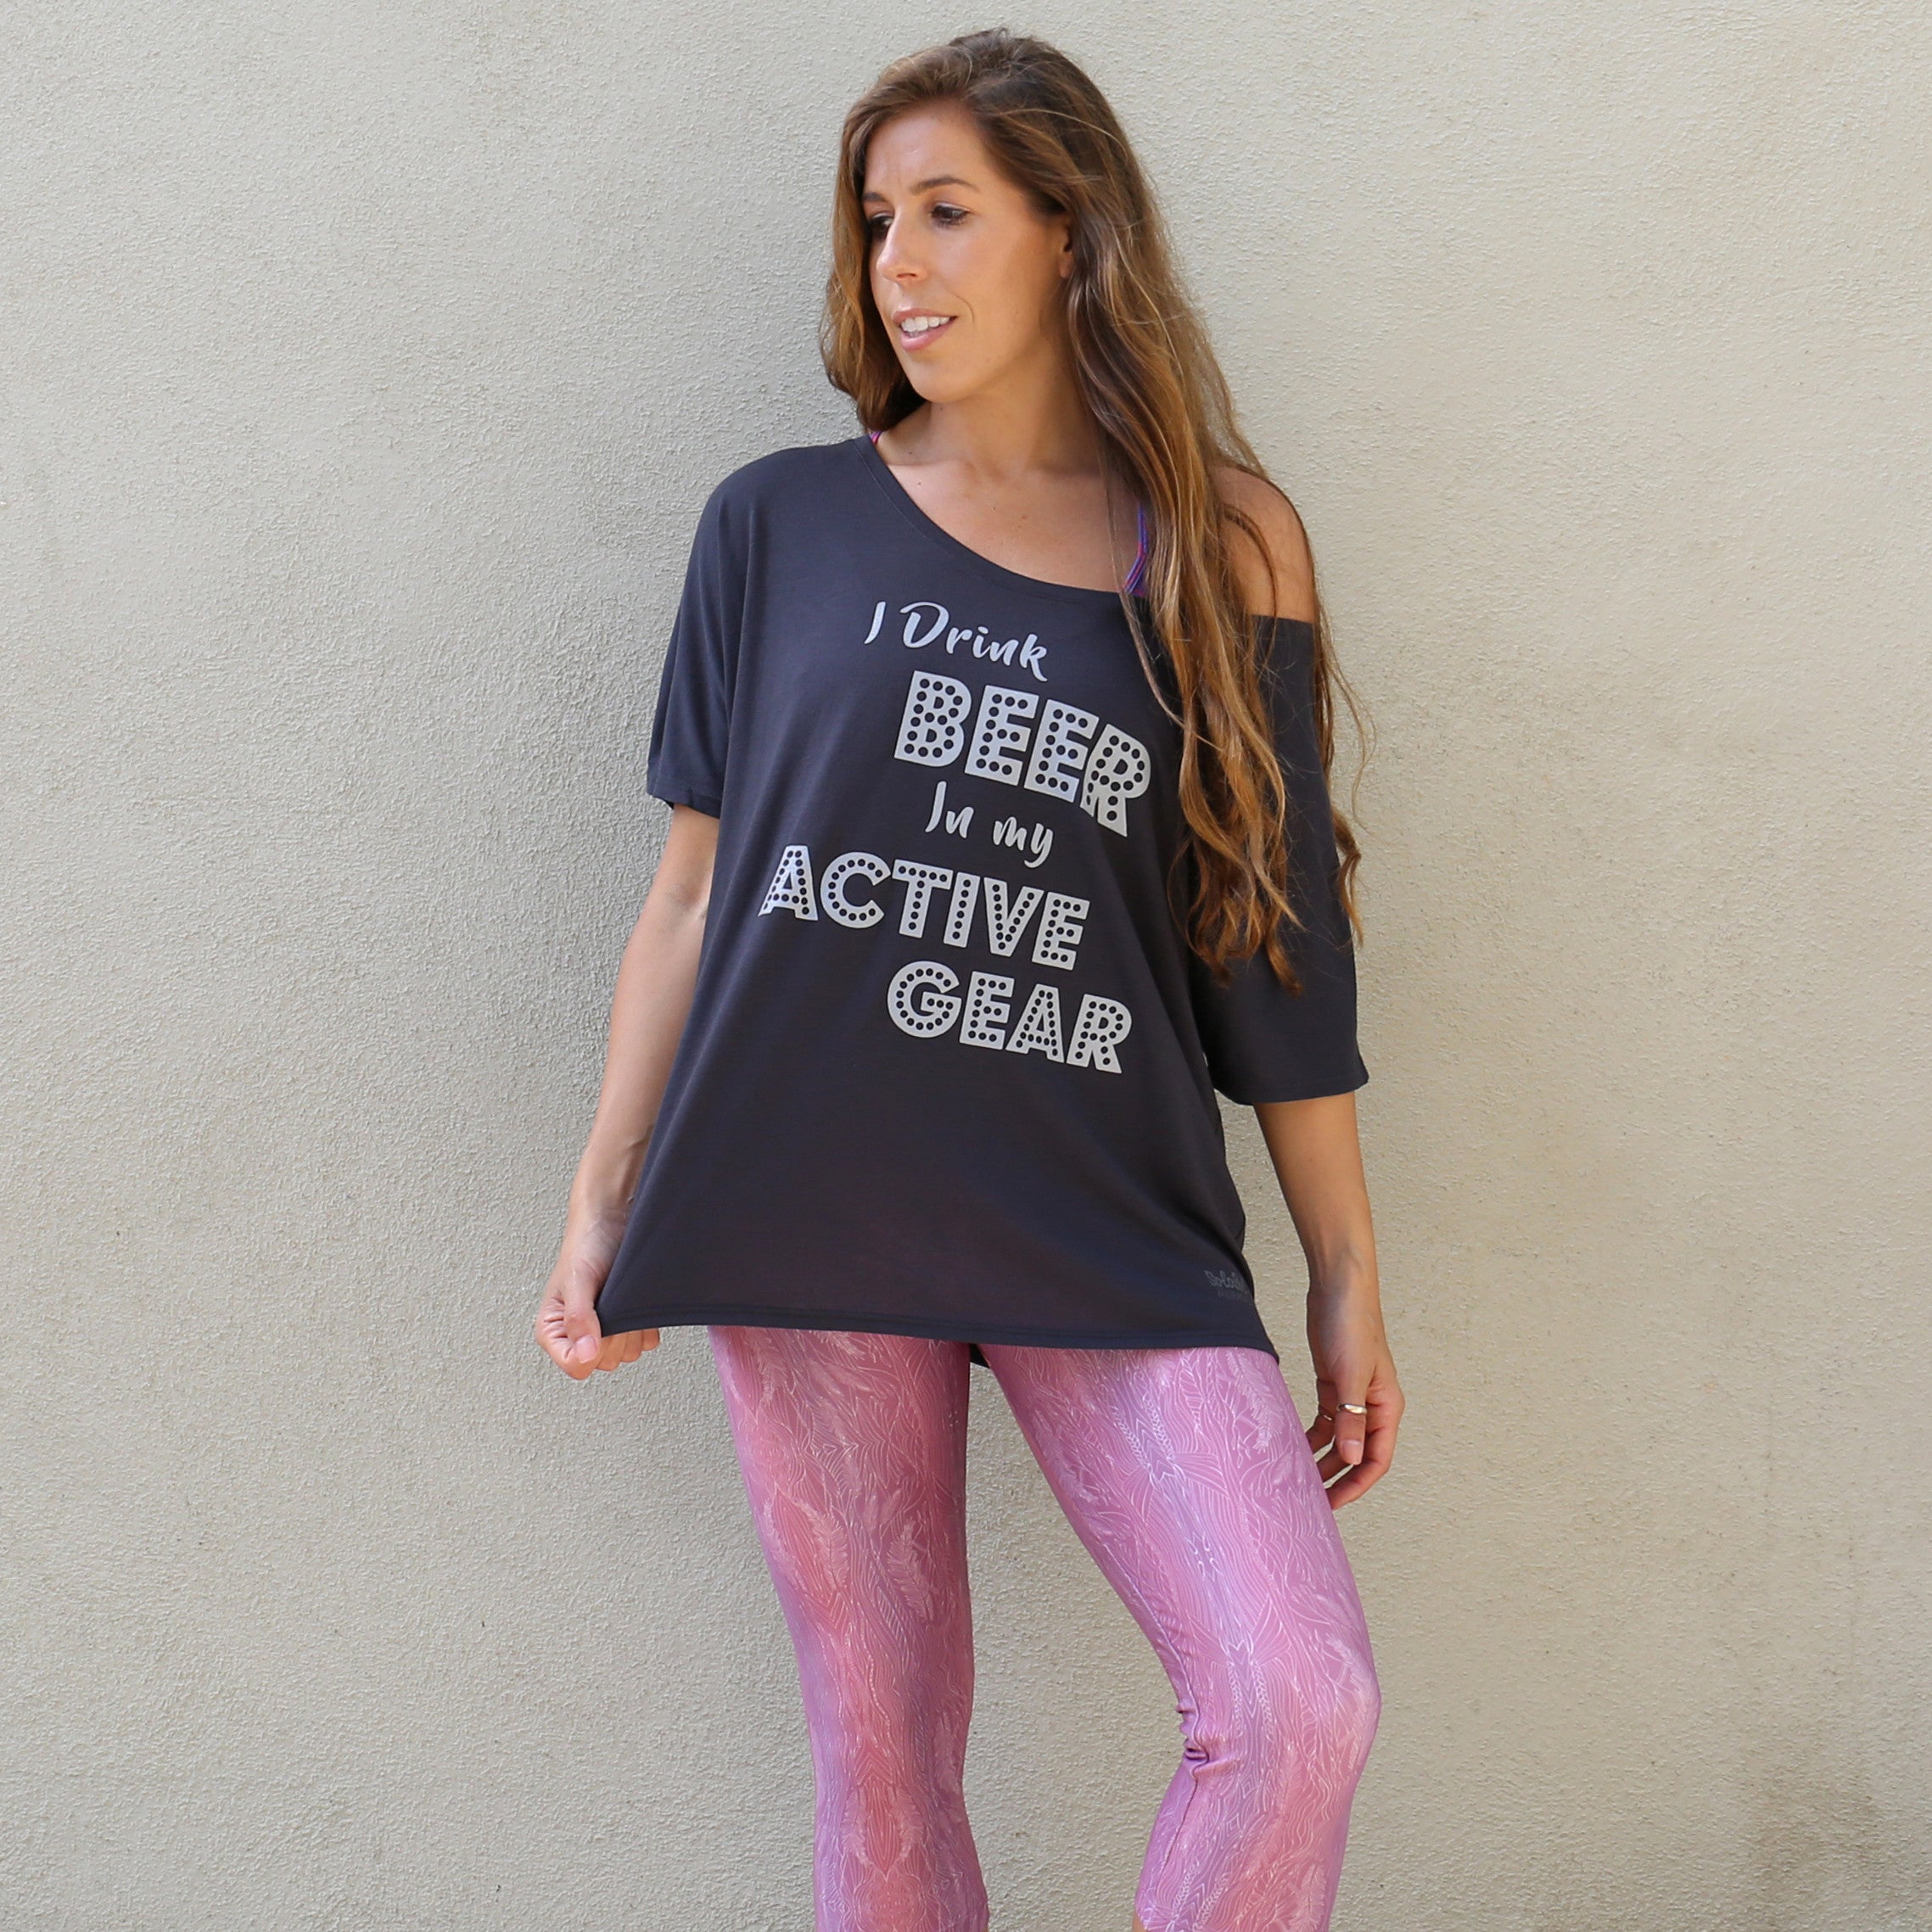 Graphic Slouchy Tee "I Drink Beer in My Active Gear" Charcoal Grey